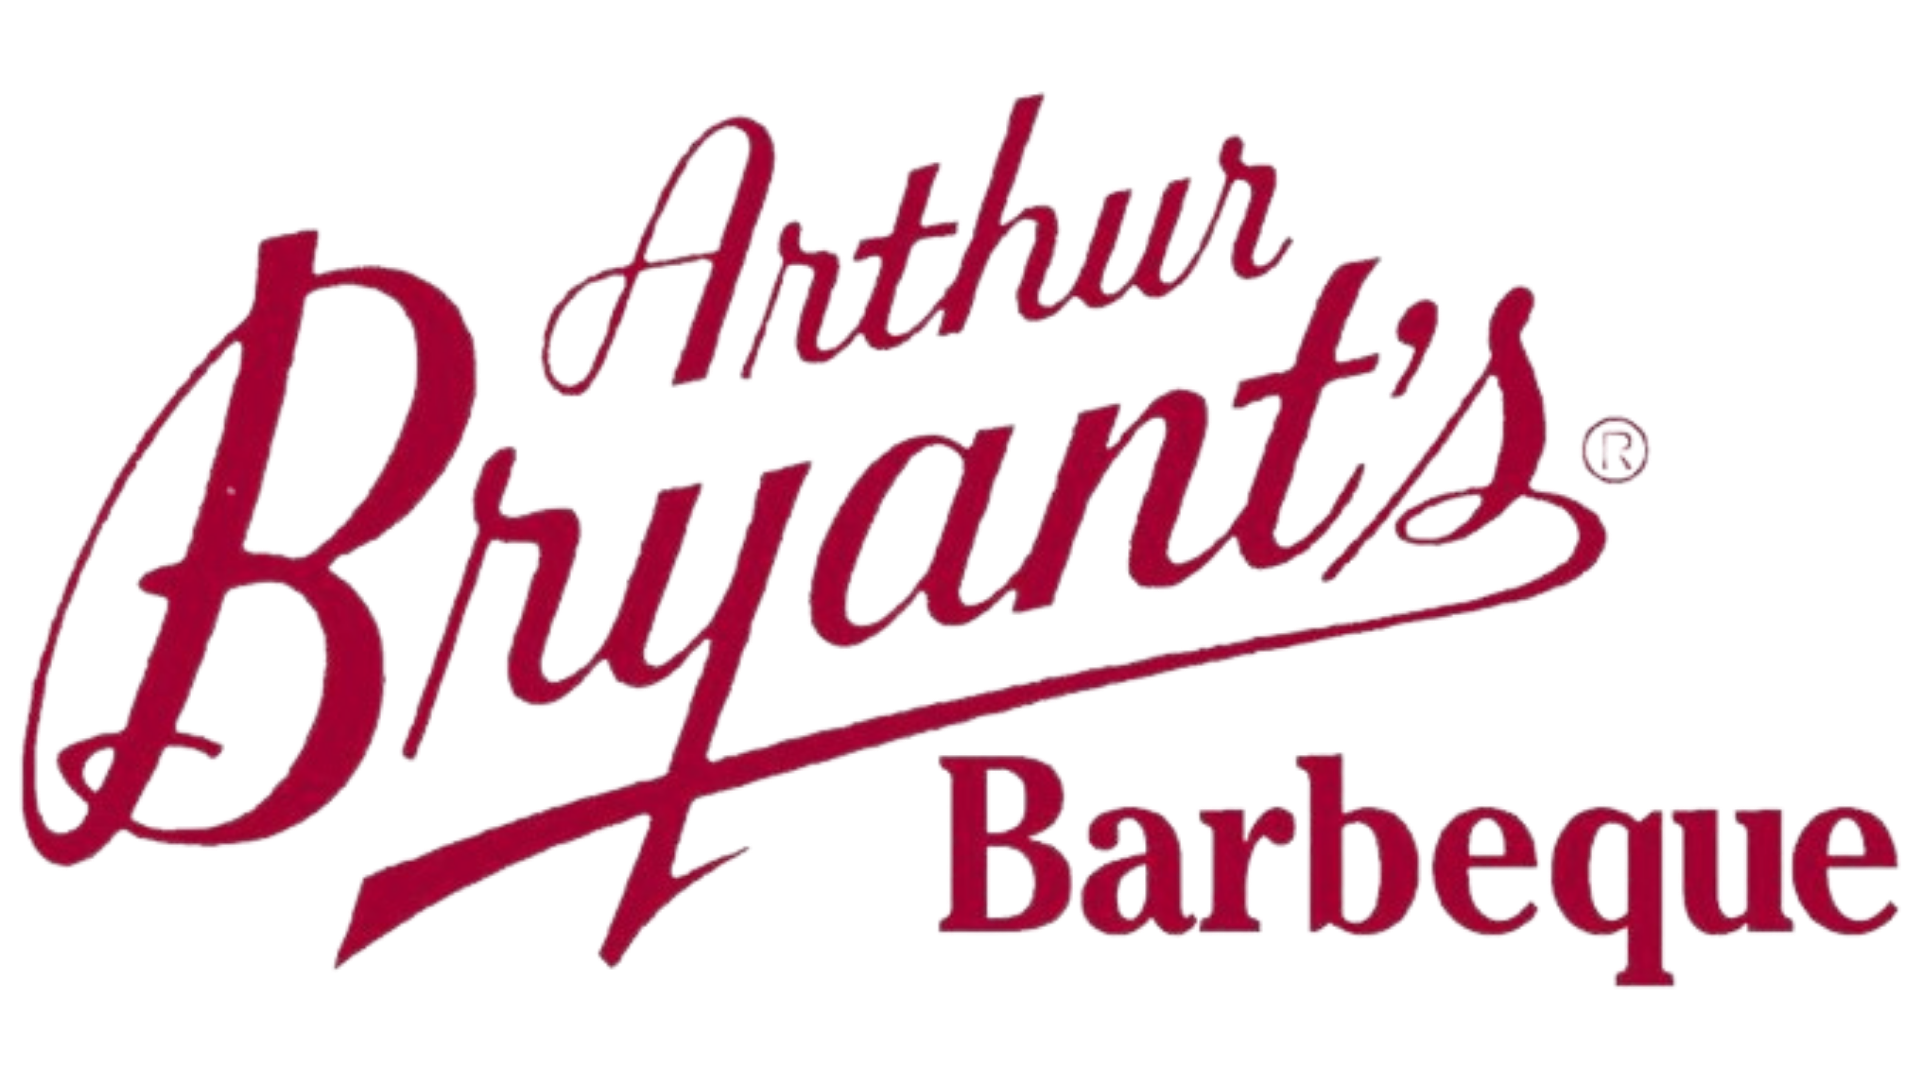 The logo for Arthur Bryant's Barbeque.